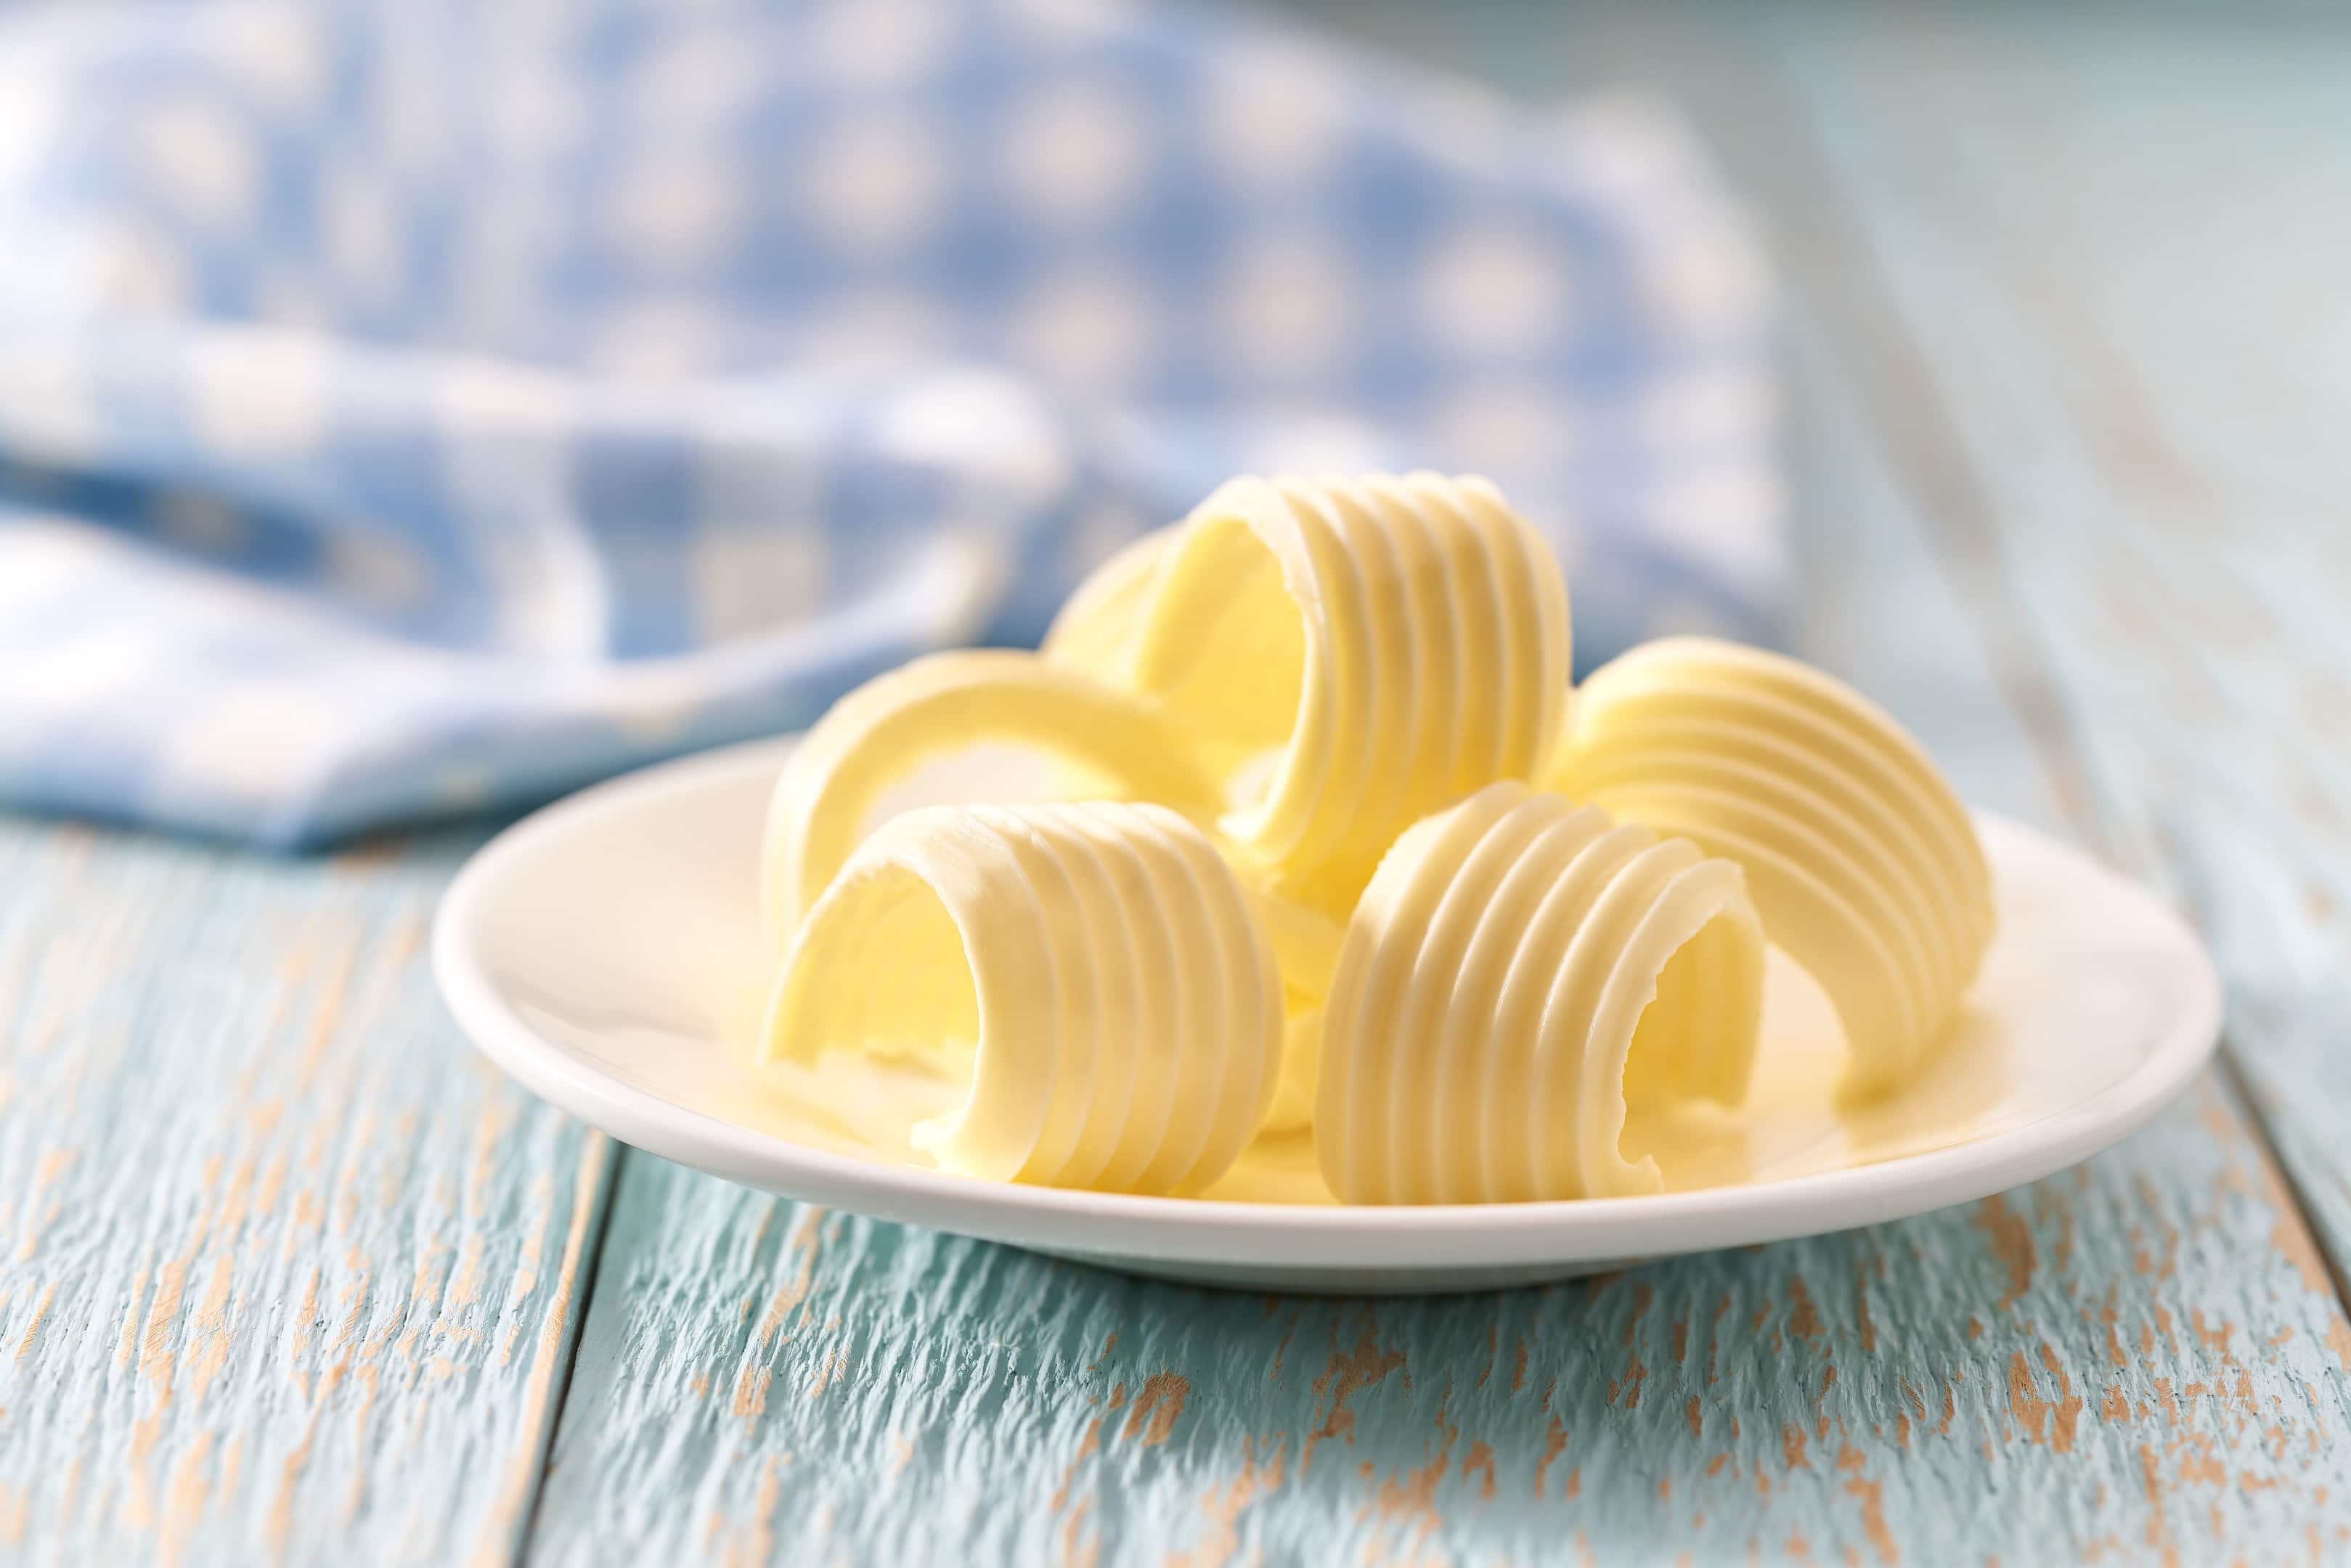 Butter curls rolls on ceramic bowl on wooden table